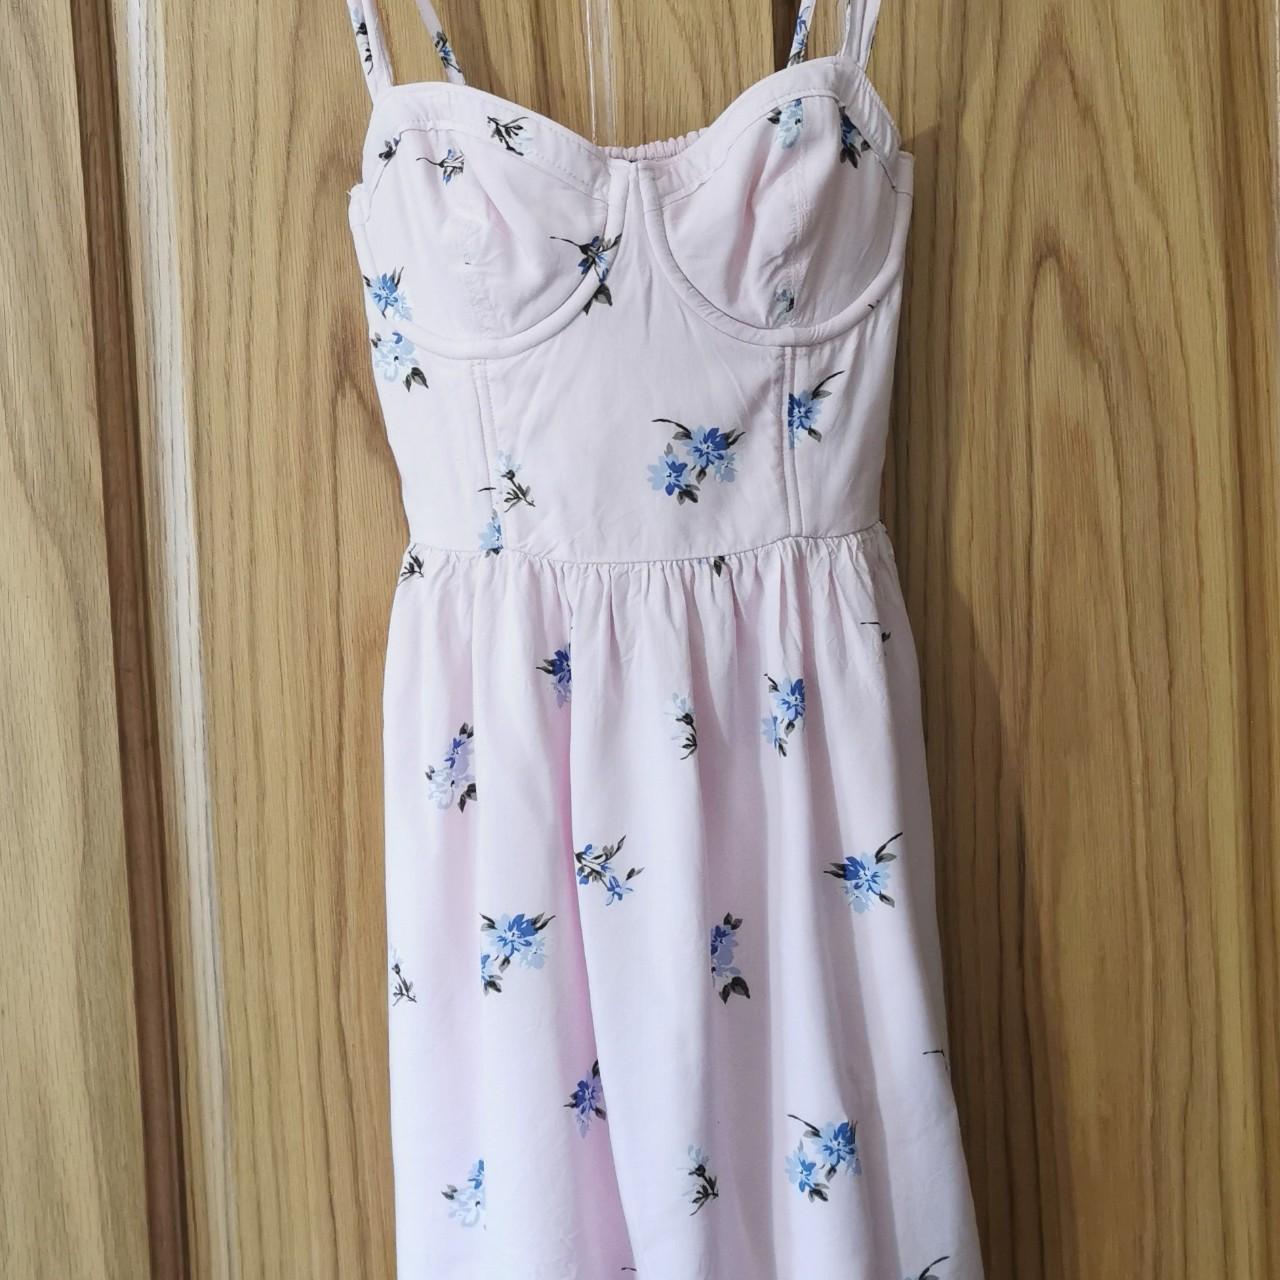 Pale Pink Abercrombie & Fitch Mini Dress with Blue... - Depop